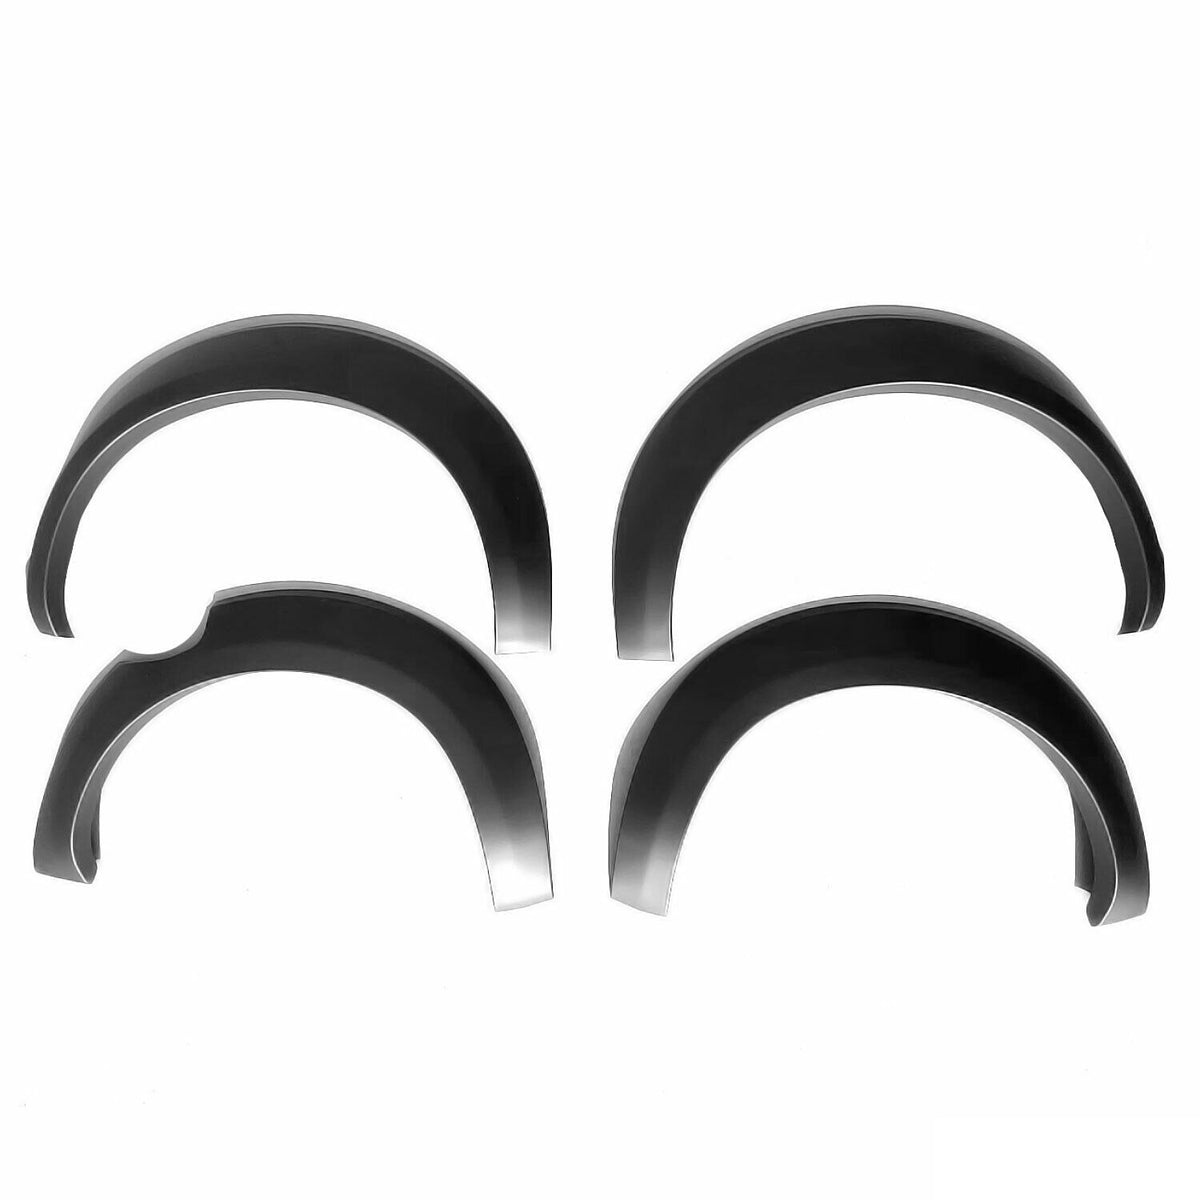 Wheel arches fender extensions for Nissan Navara 2016-2020 ABS black 4 pieces